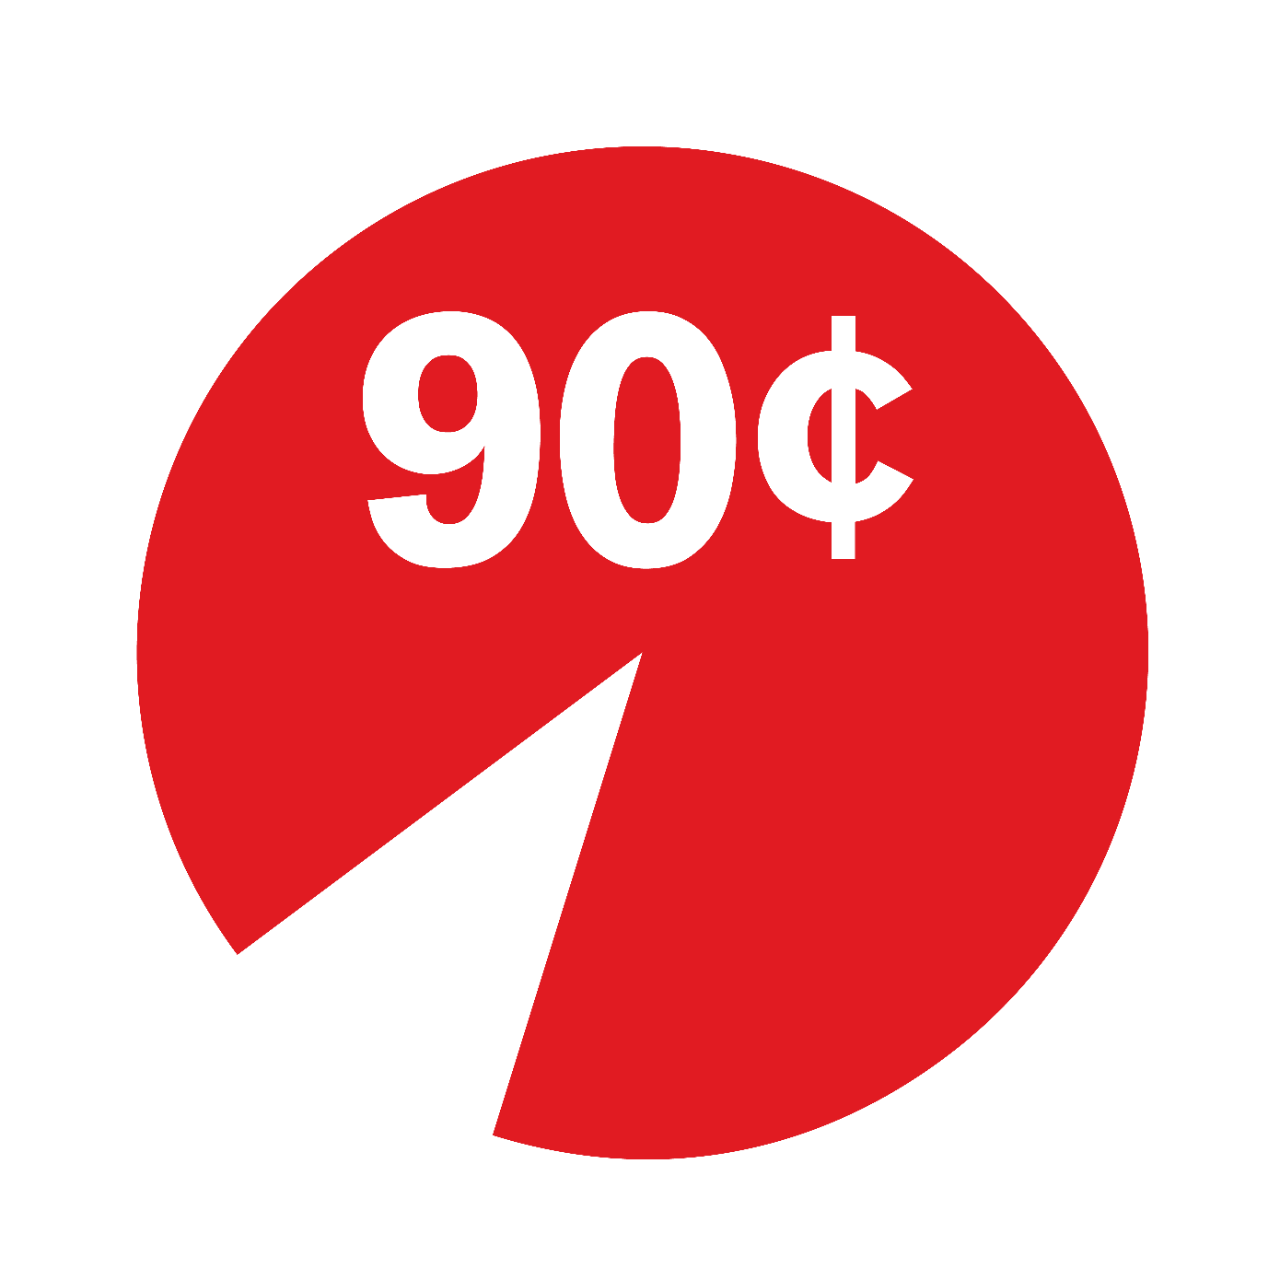 Red pie chart with 90 cents written in it